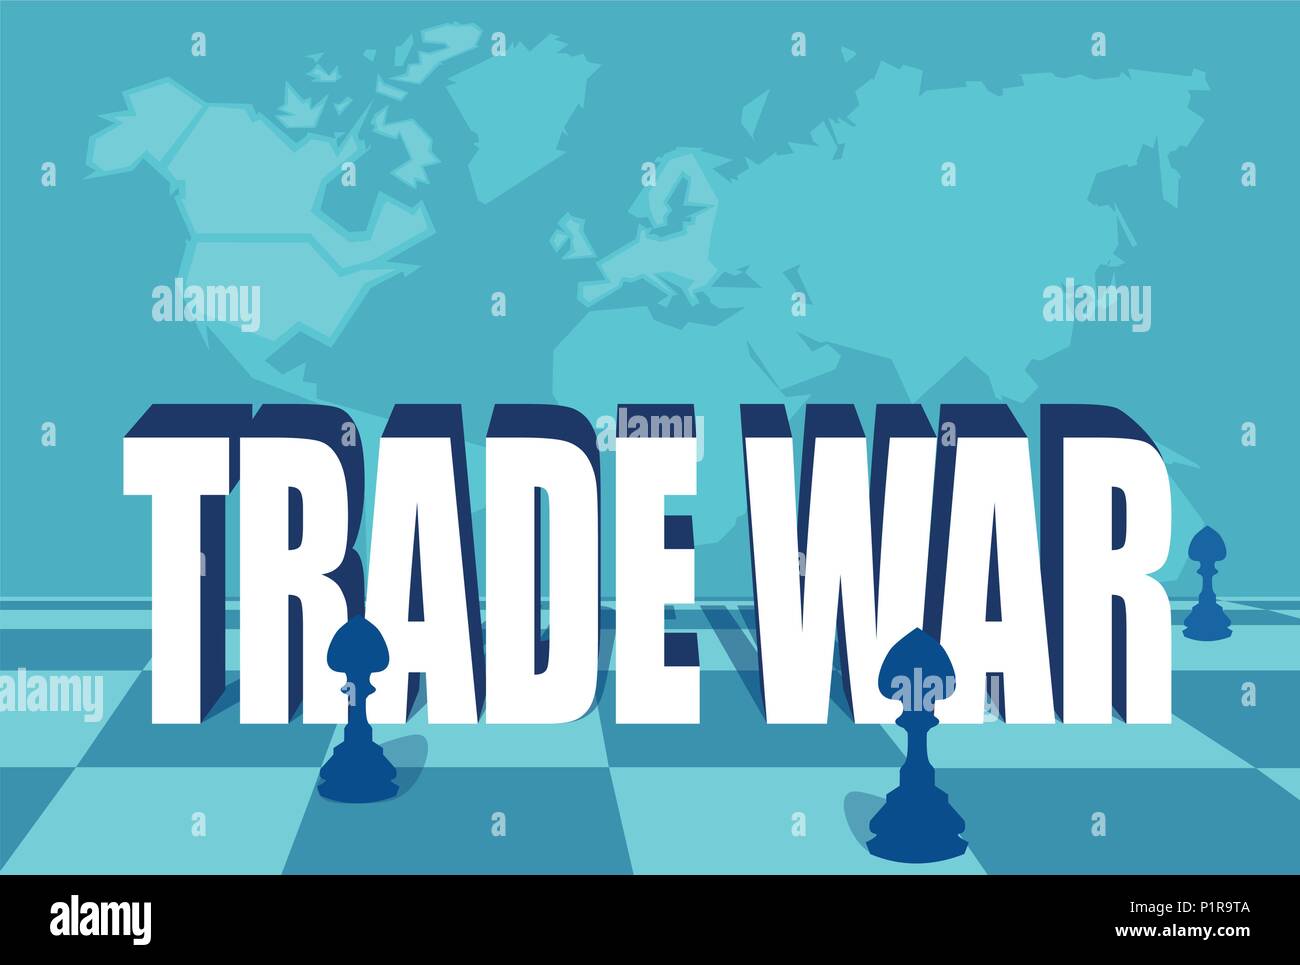 Concept vector illustration of trade war and limiting imports. Stock Vector